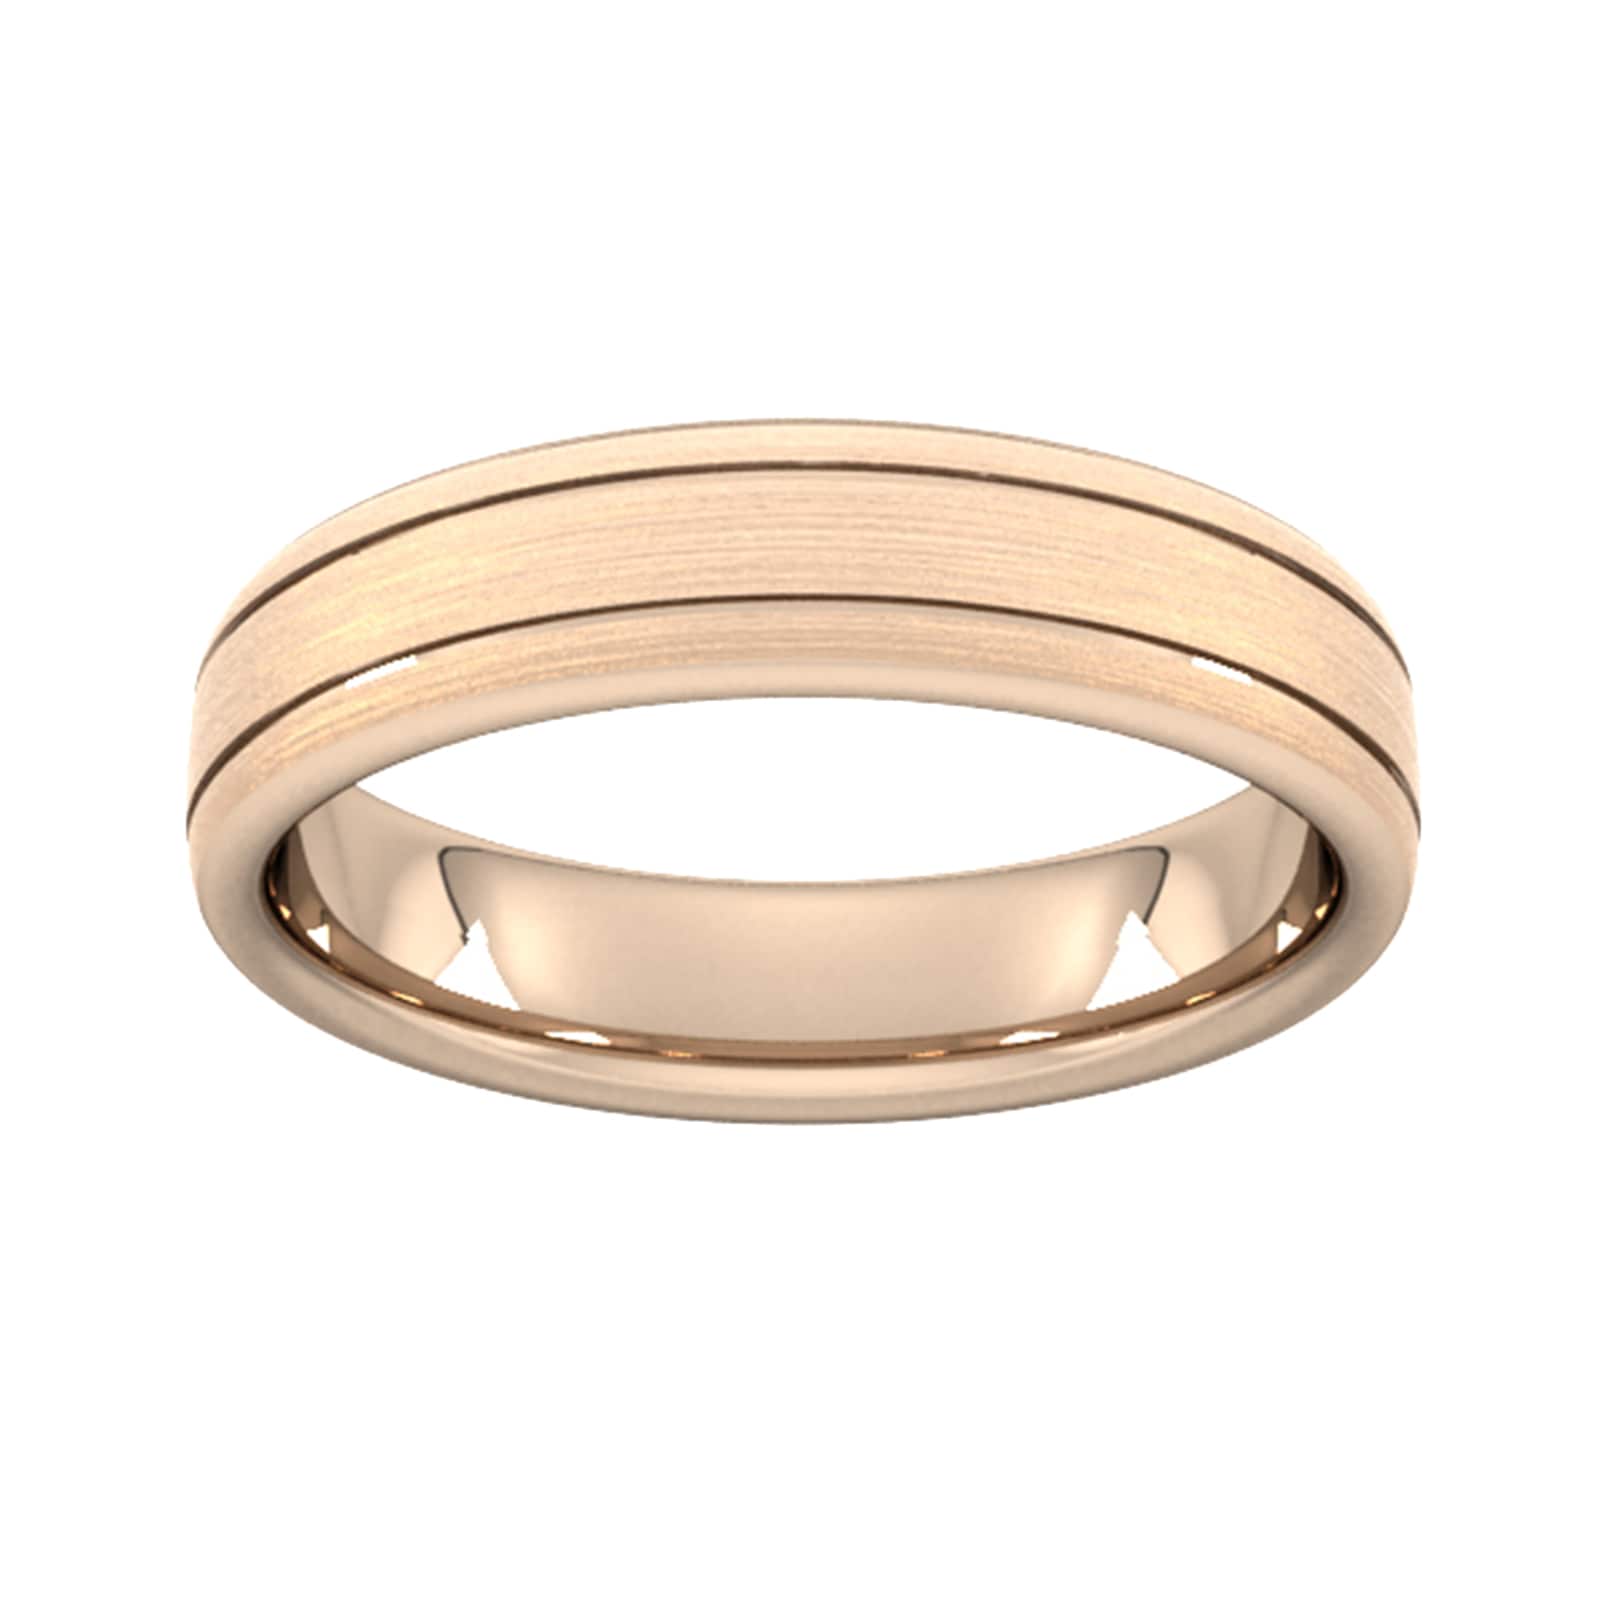 5mm Flat Court Heavy Matt Finish With Double Grooves Wedding Ring In 9 Carat Rose Gold - Ring Size Y